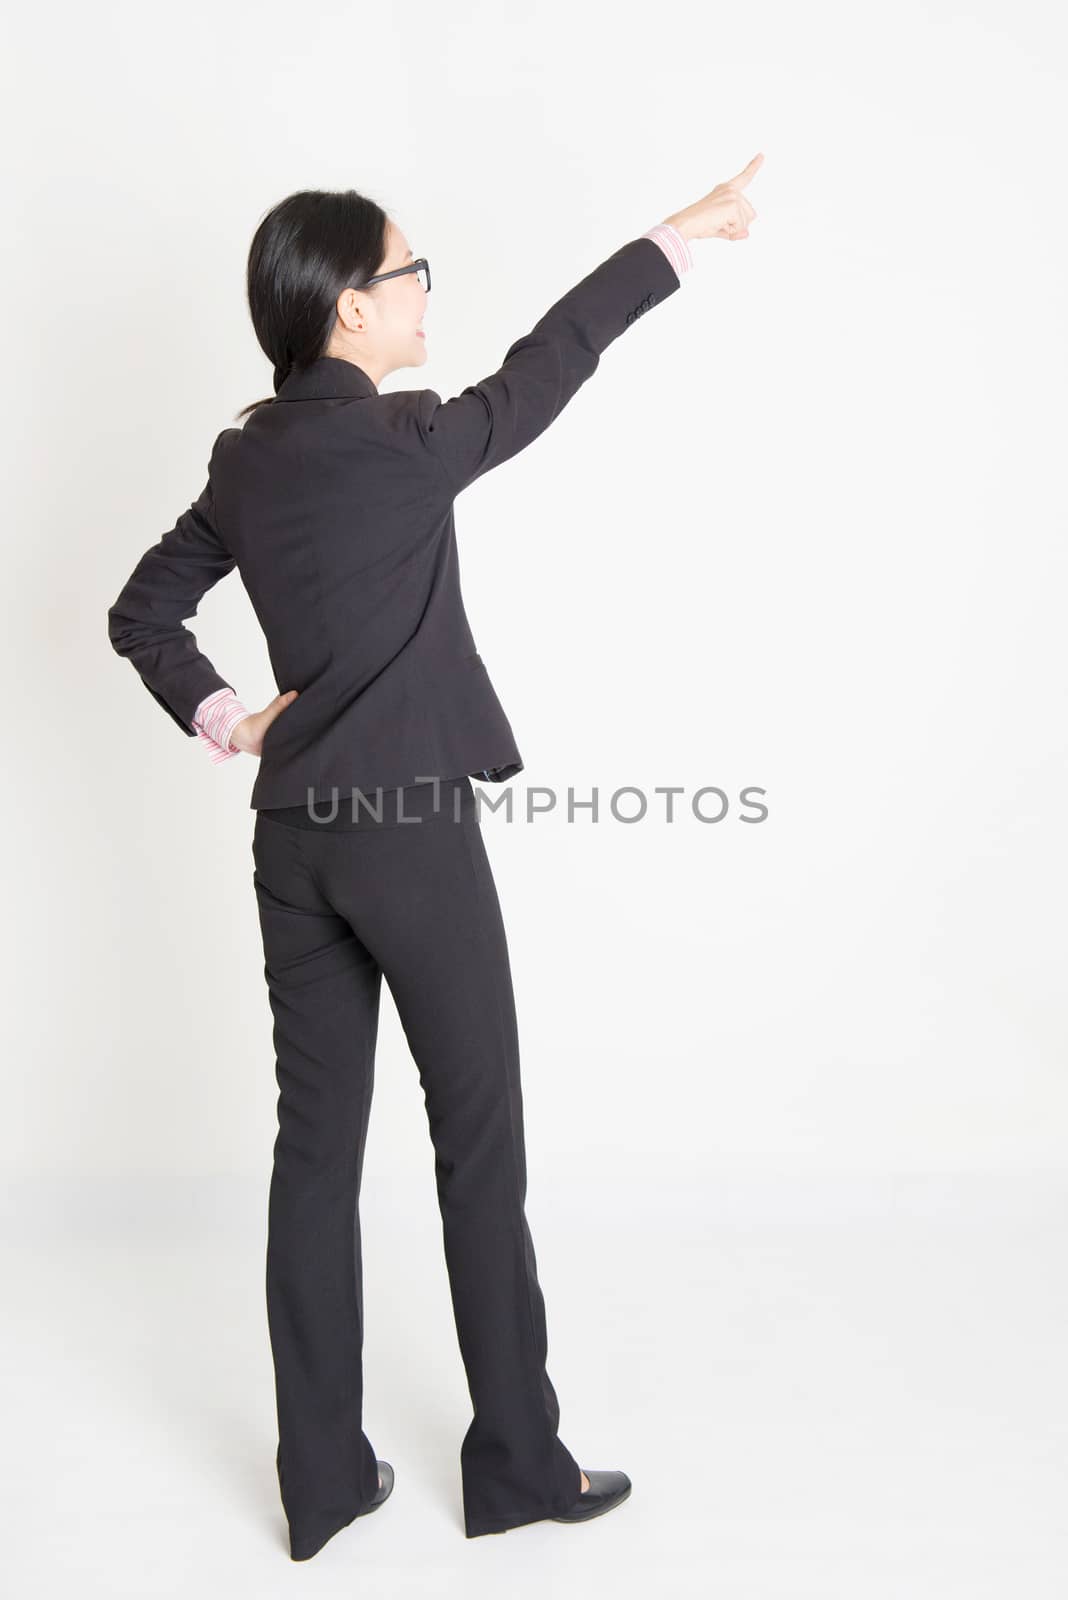 Full body rear view of young Asian businesswoman in formalwear finger pointing on something, standing on plain background.